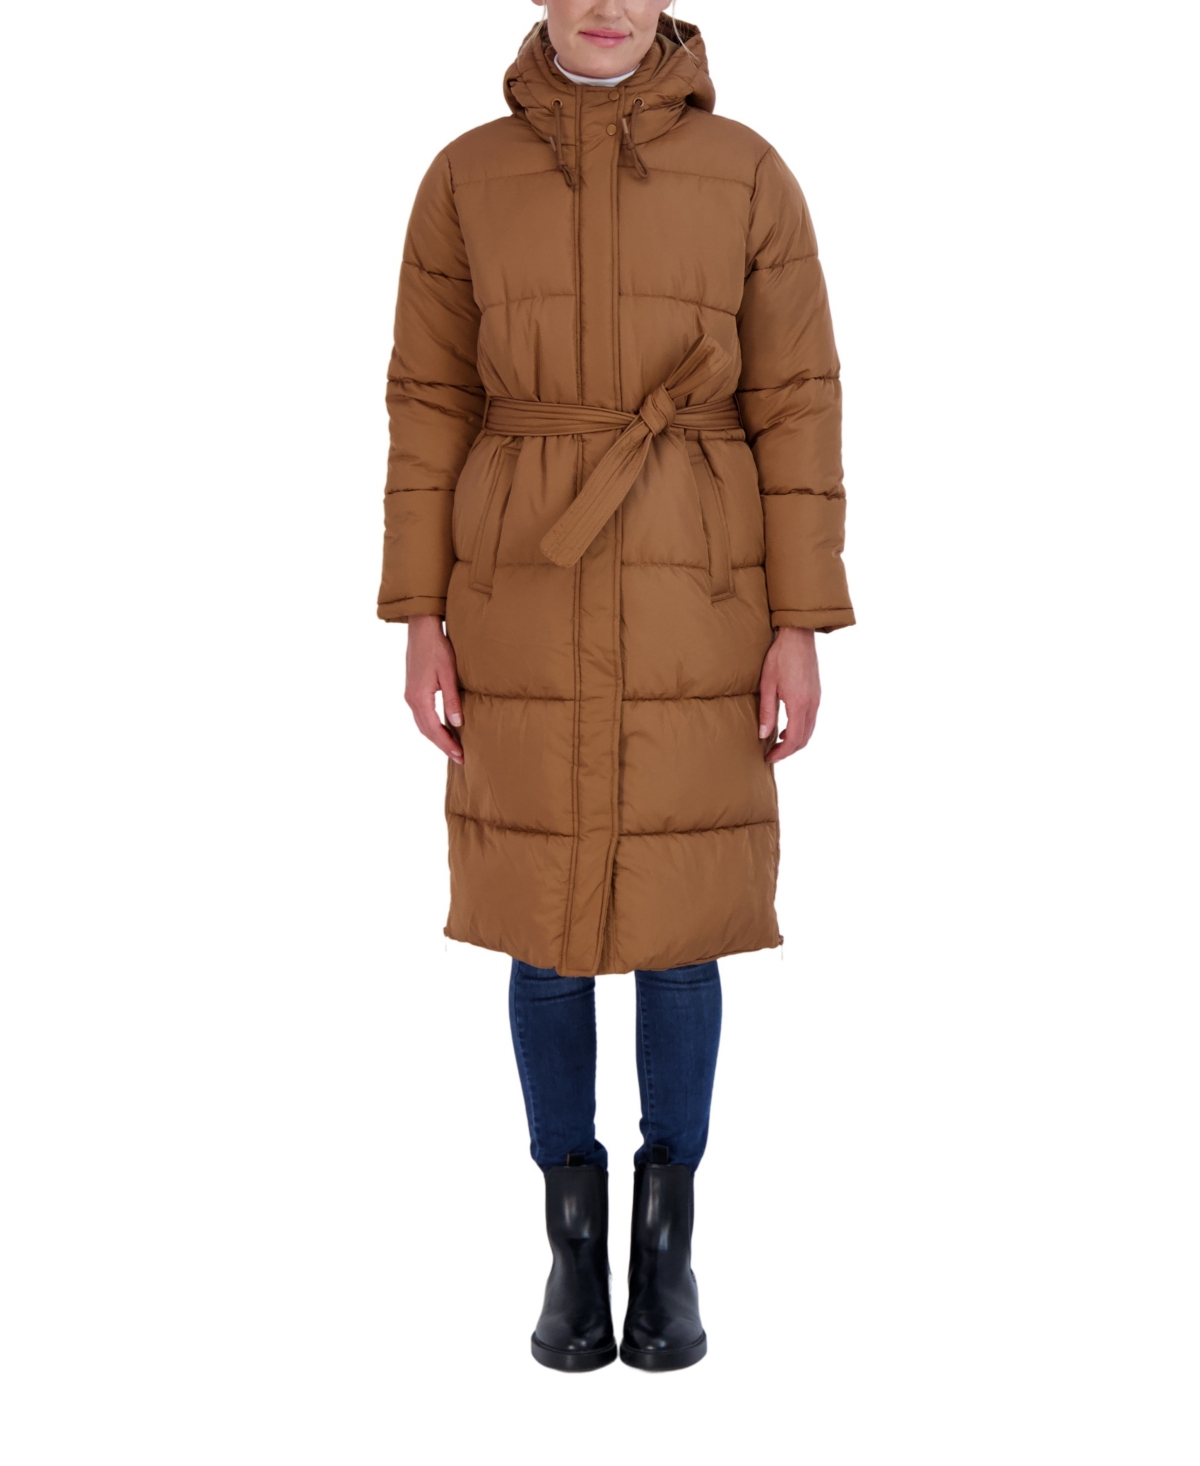 Women's Long Puffer Jacket with Hood and Belt - Olive